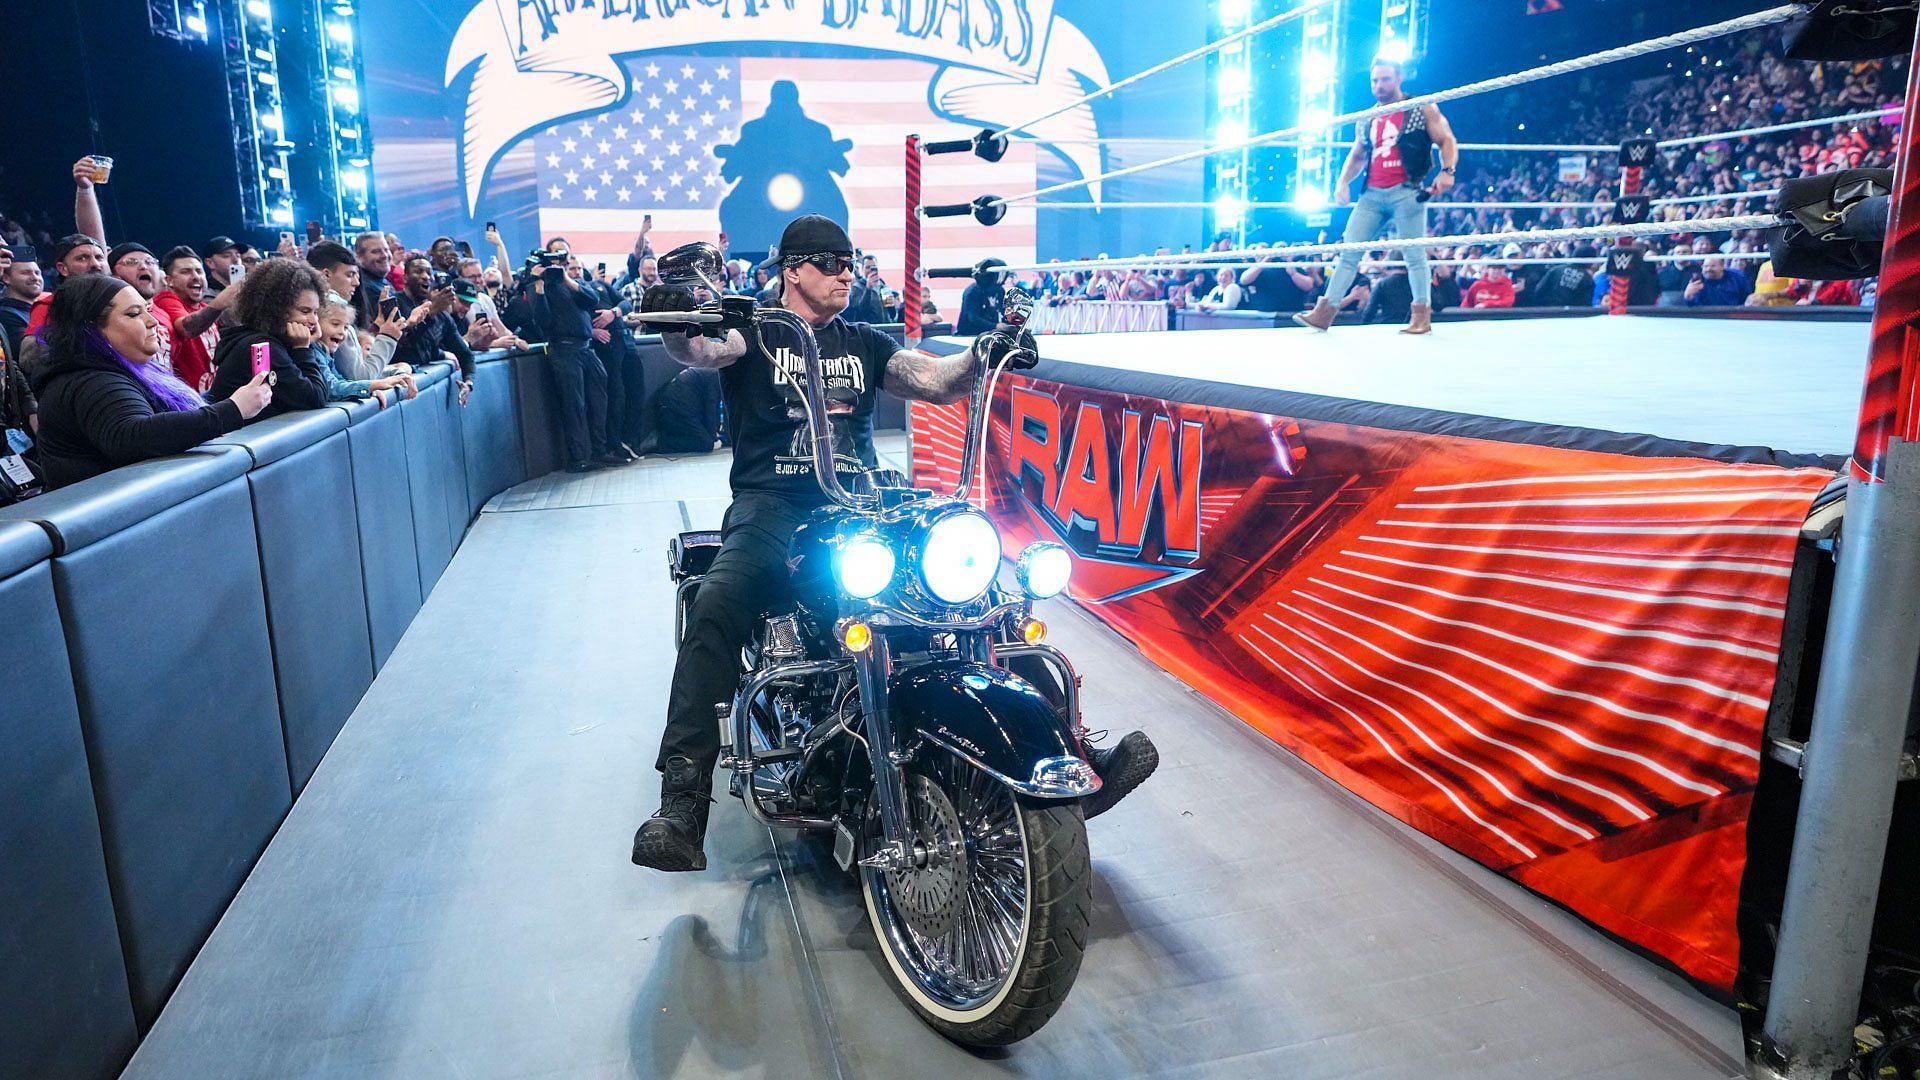 The Undertaker arrives to WWE RAW XXX as The American Badass